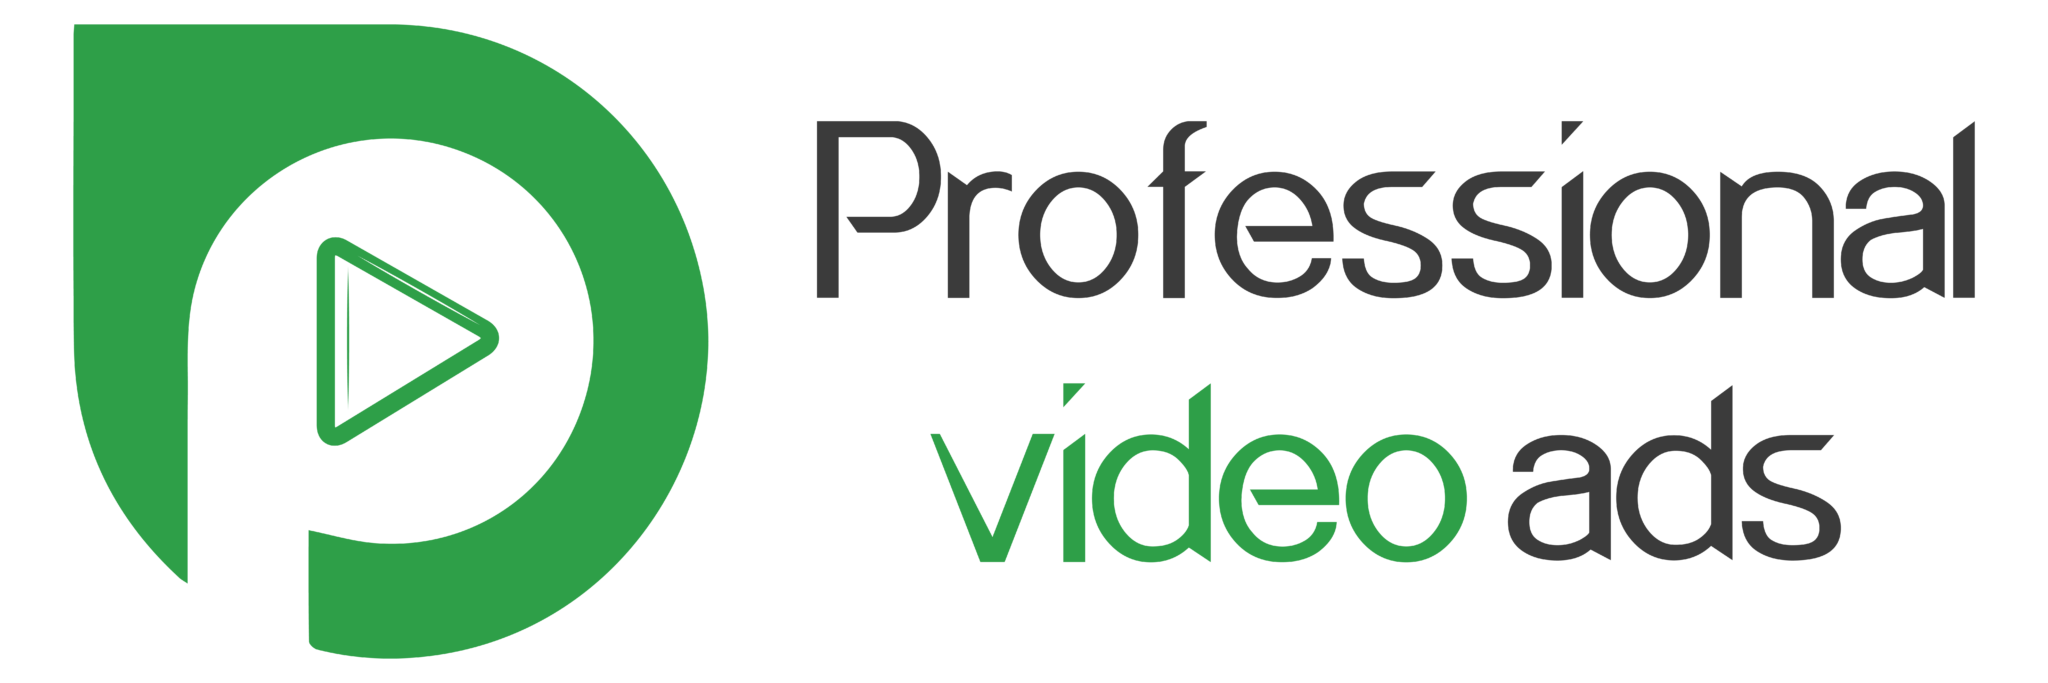 Logo for Professional Video Ads